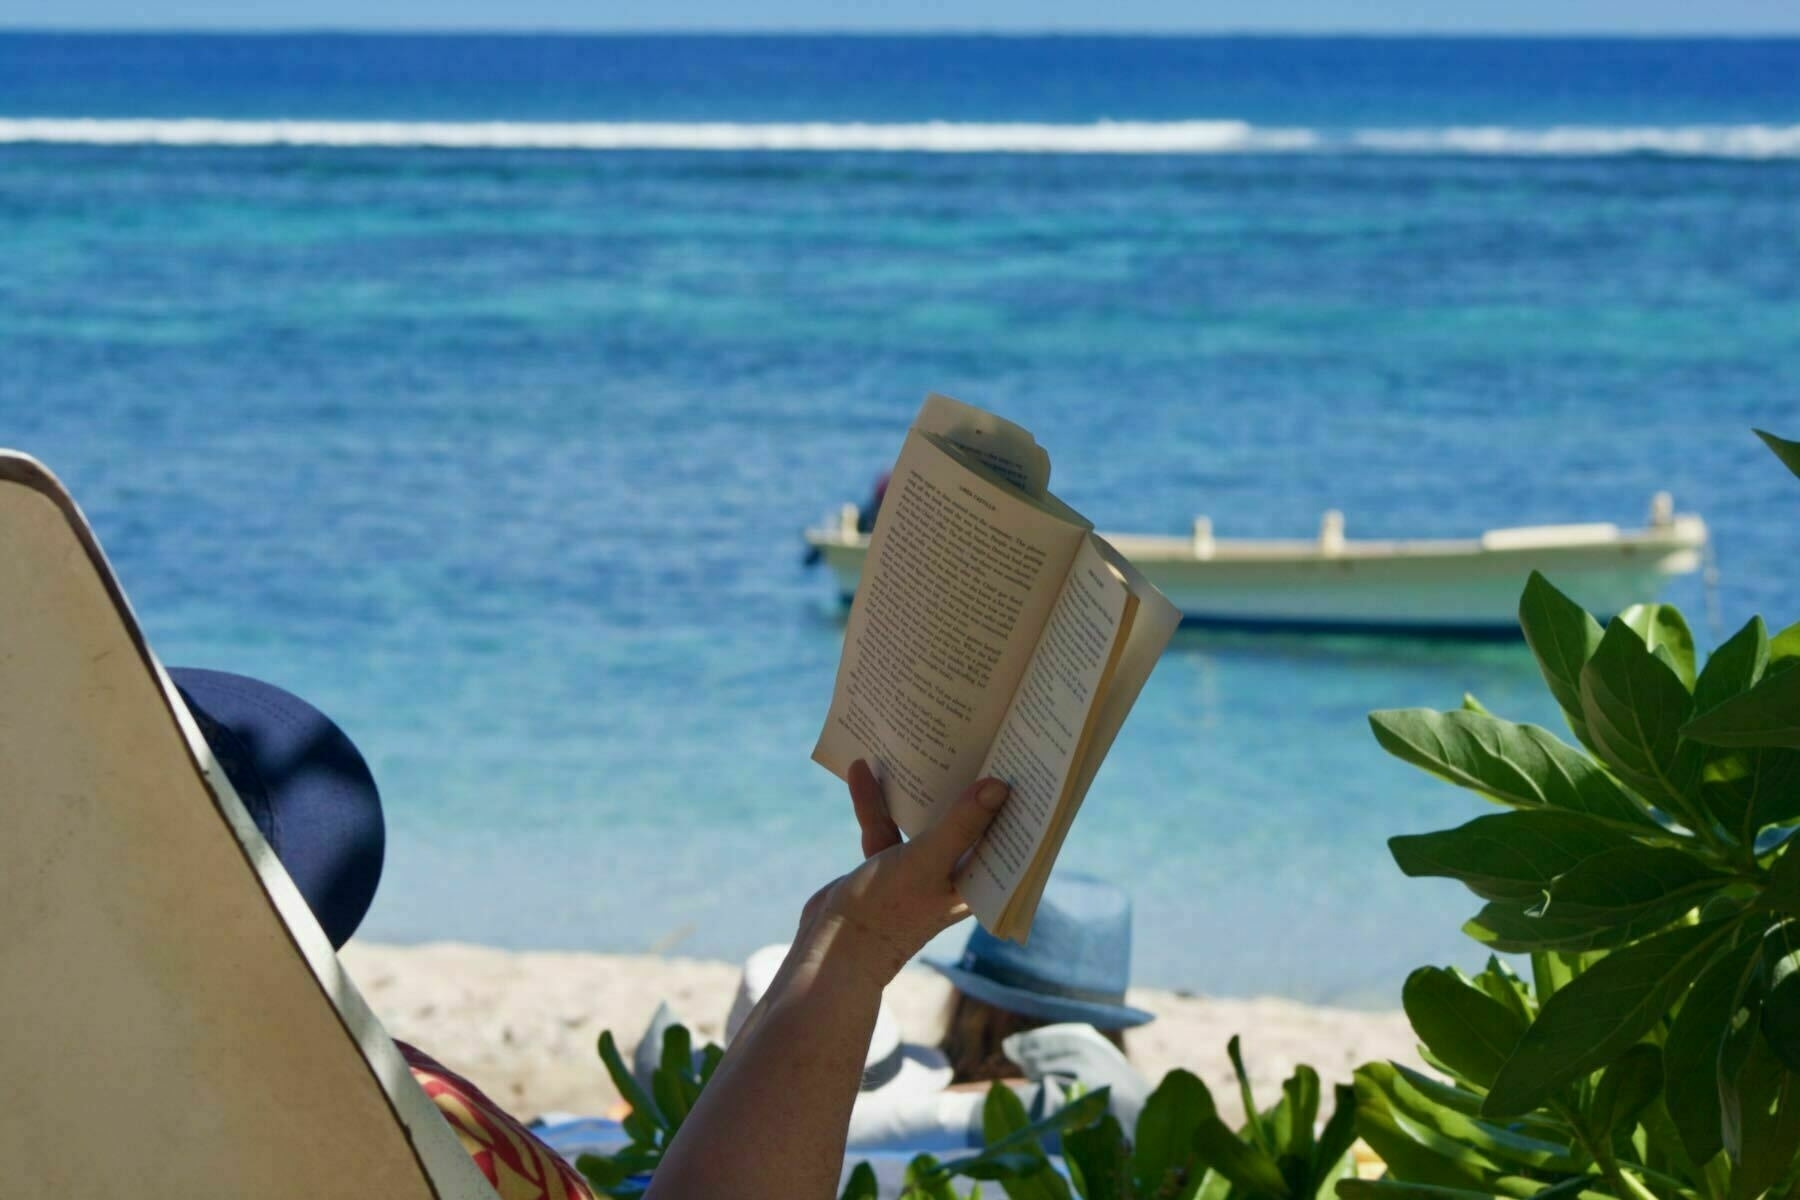 Rear view of an obscured person in a deckchair on the beach, arm extended with book, blue sea behind. 